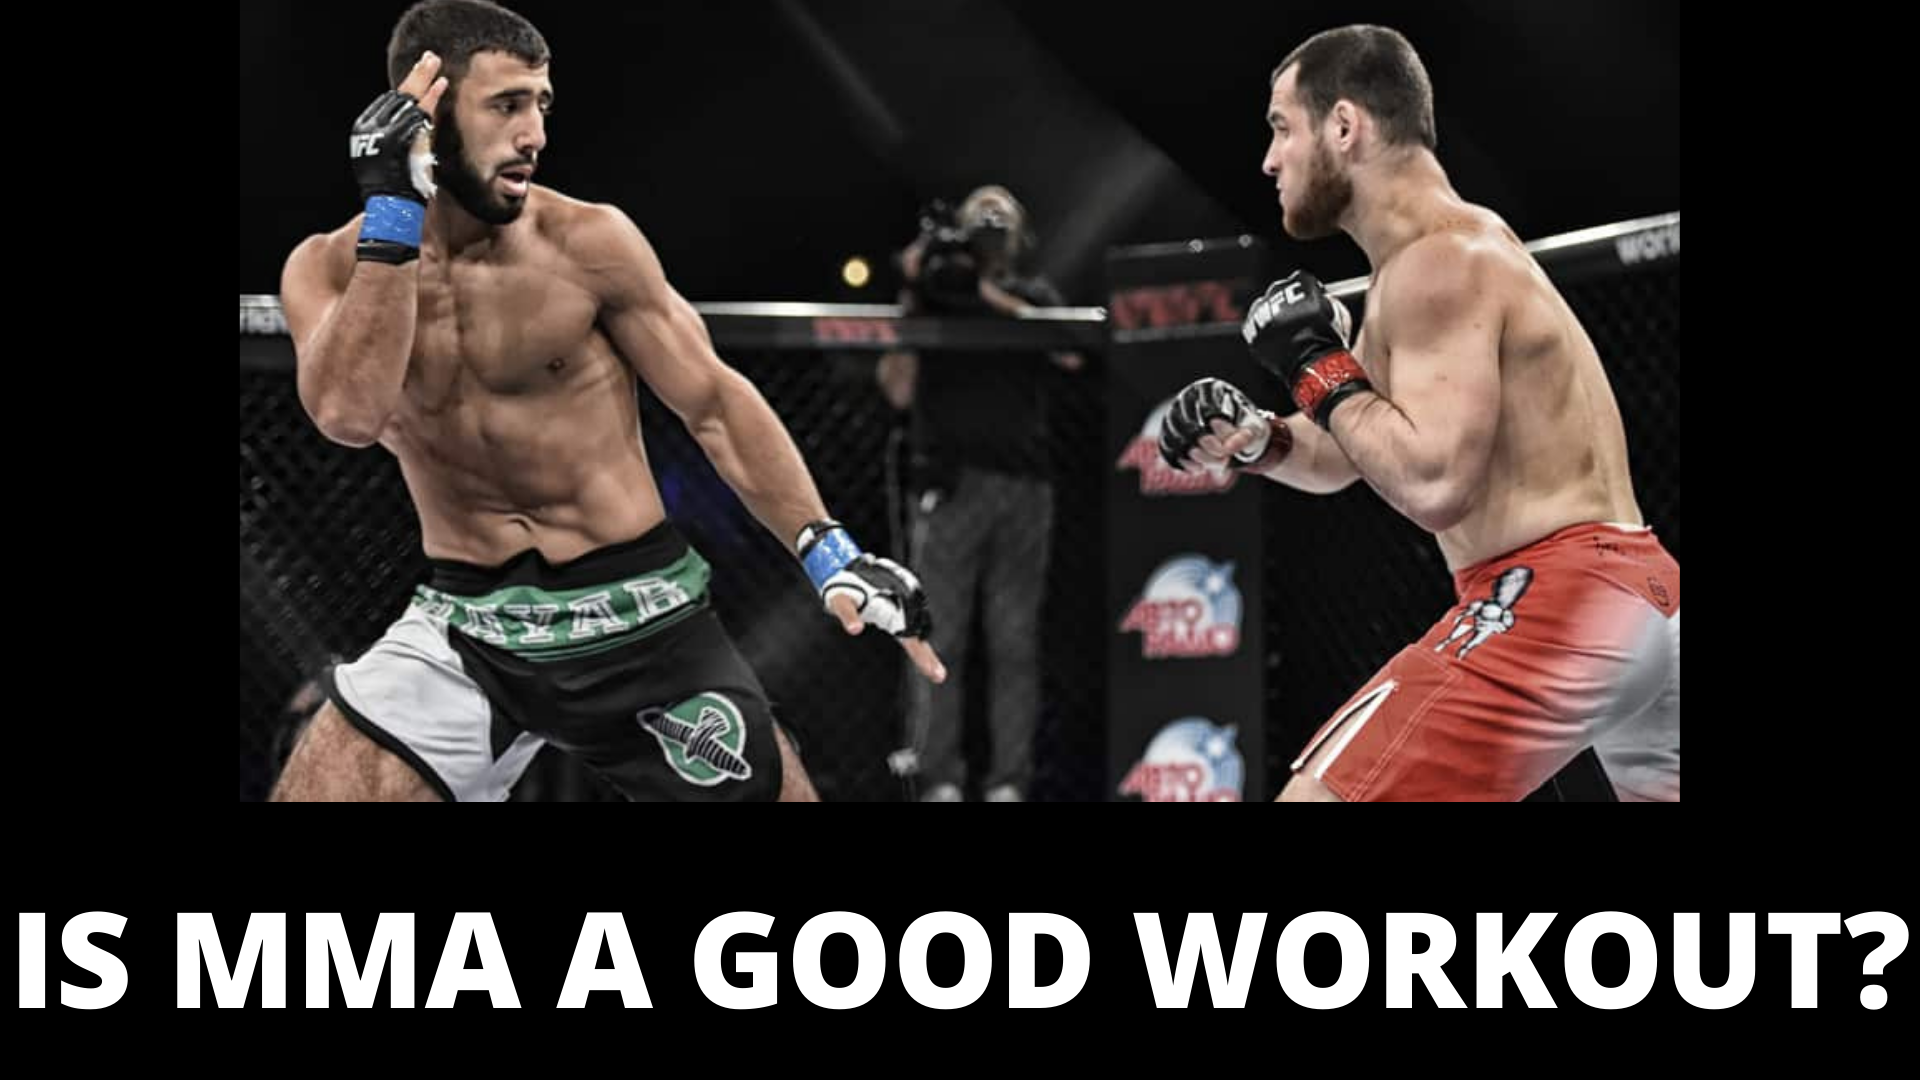 Is MMA a Good Workout? 10 Reasons Why MMA is a Great Workout